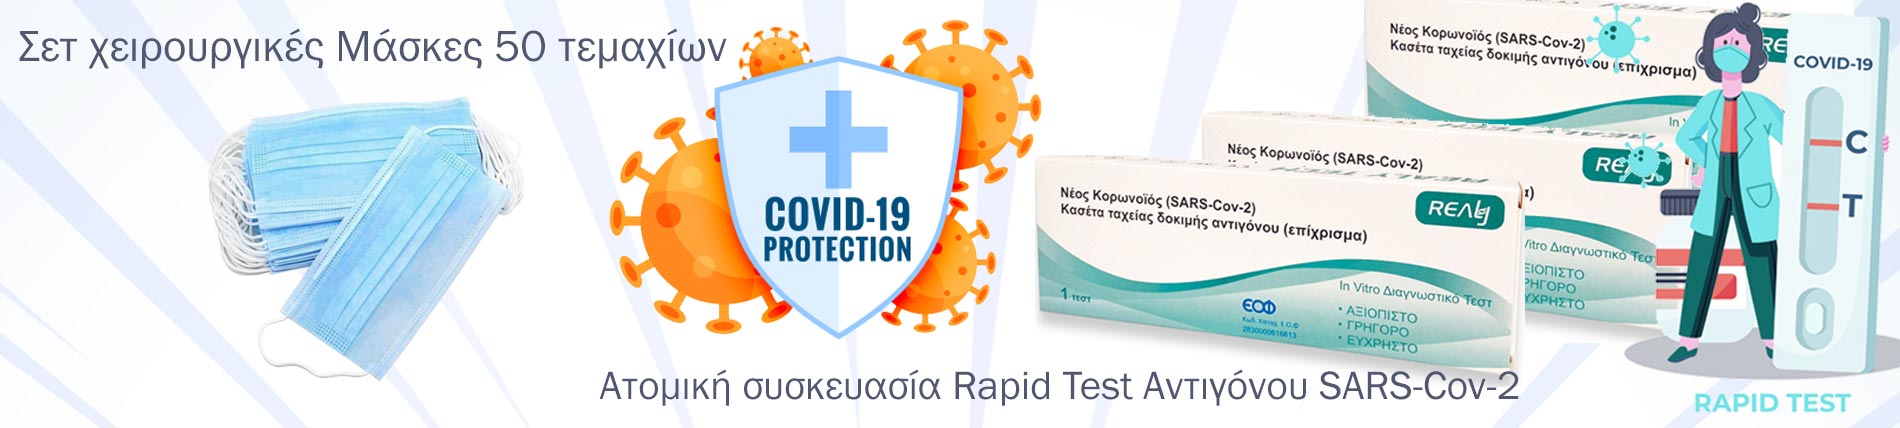 Covid Protection